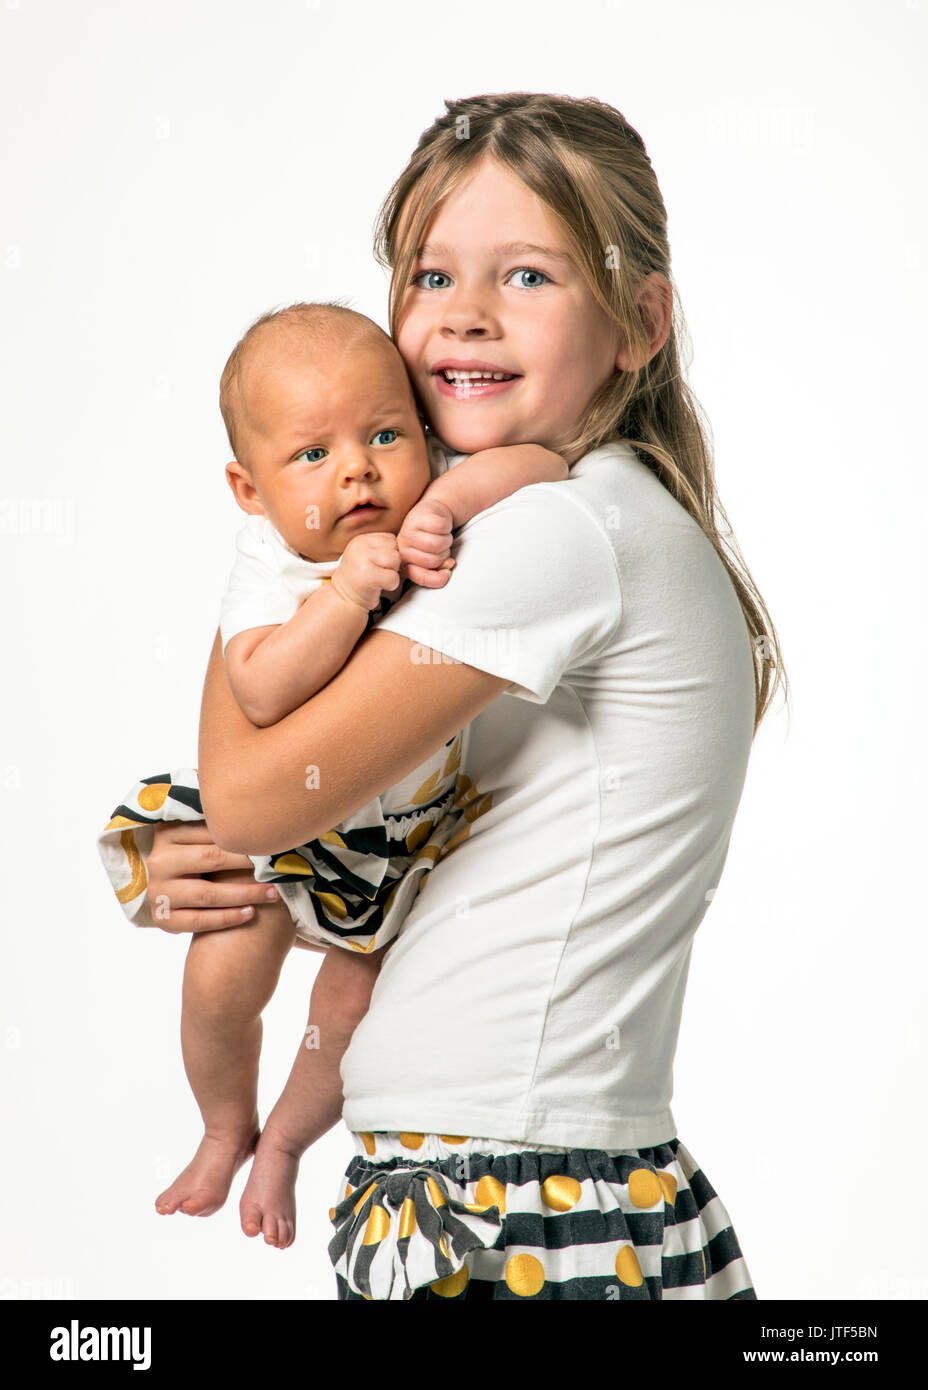 Studio portrait of 7 year old girl holding 7 week old baby Stock Photo